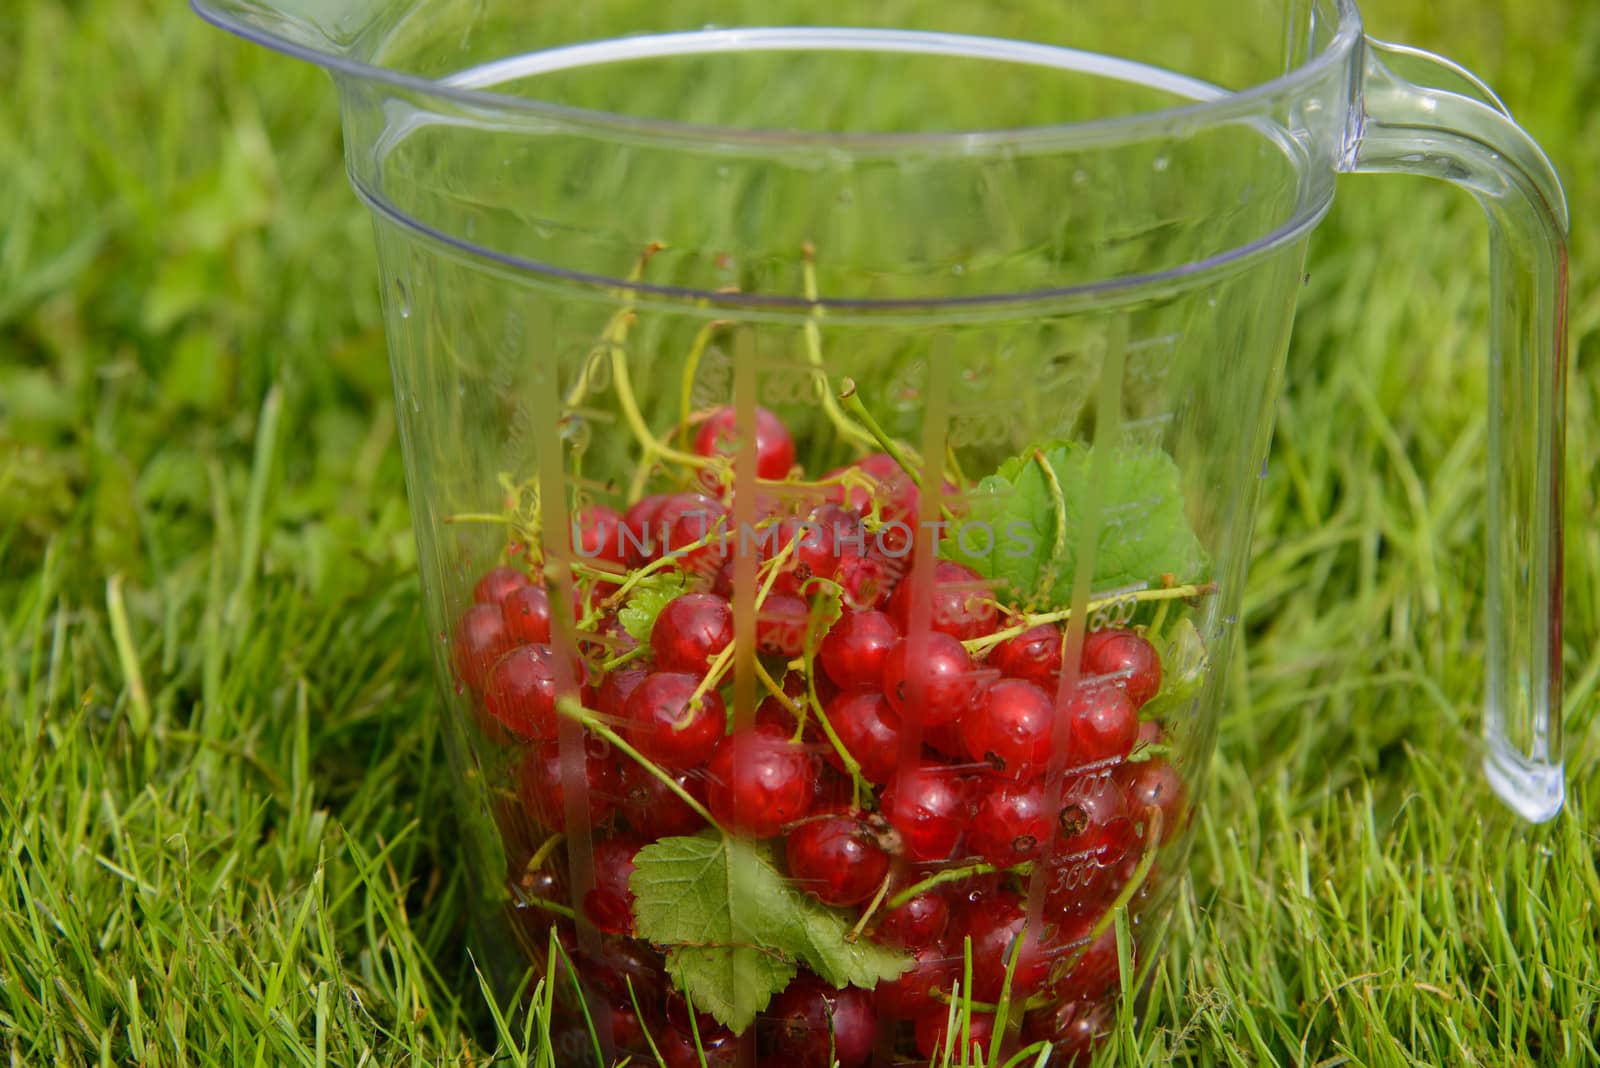 Currants in measuring cup by GryT